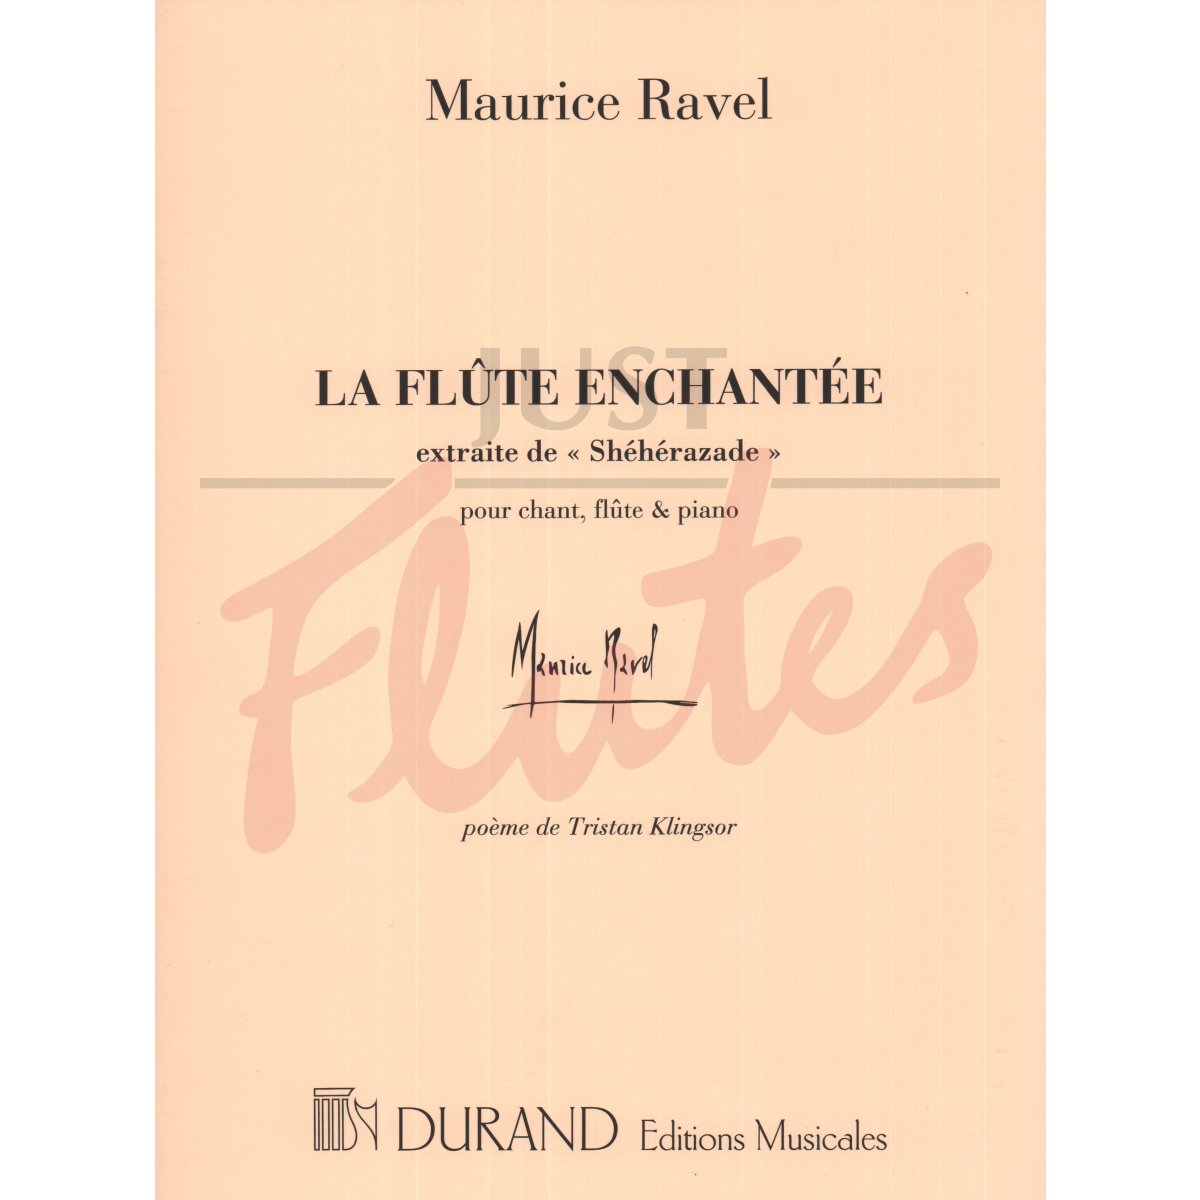 La Flûte Enchantée (from Scheherezade) for Flute, Soprano Voice and Piano